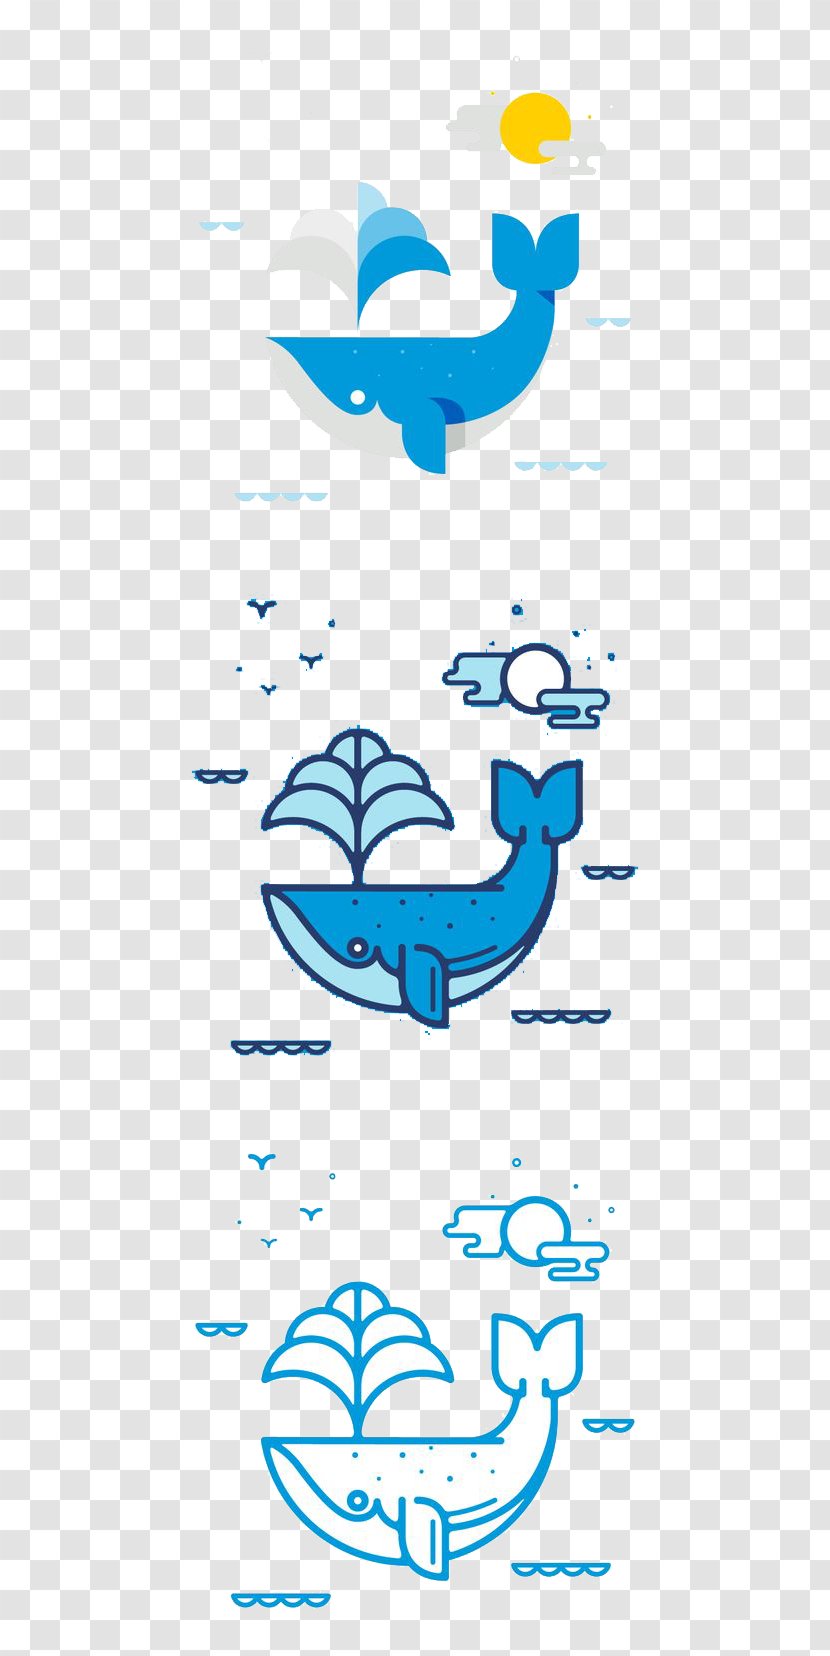 Whale Drawing Graphic Design Illustration - Fish - Flat Cute Transparent PNG